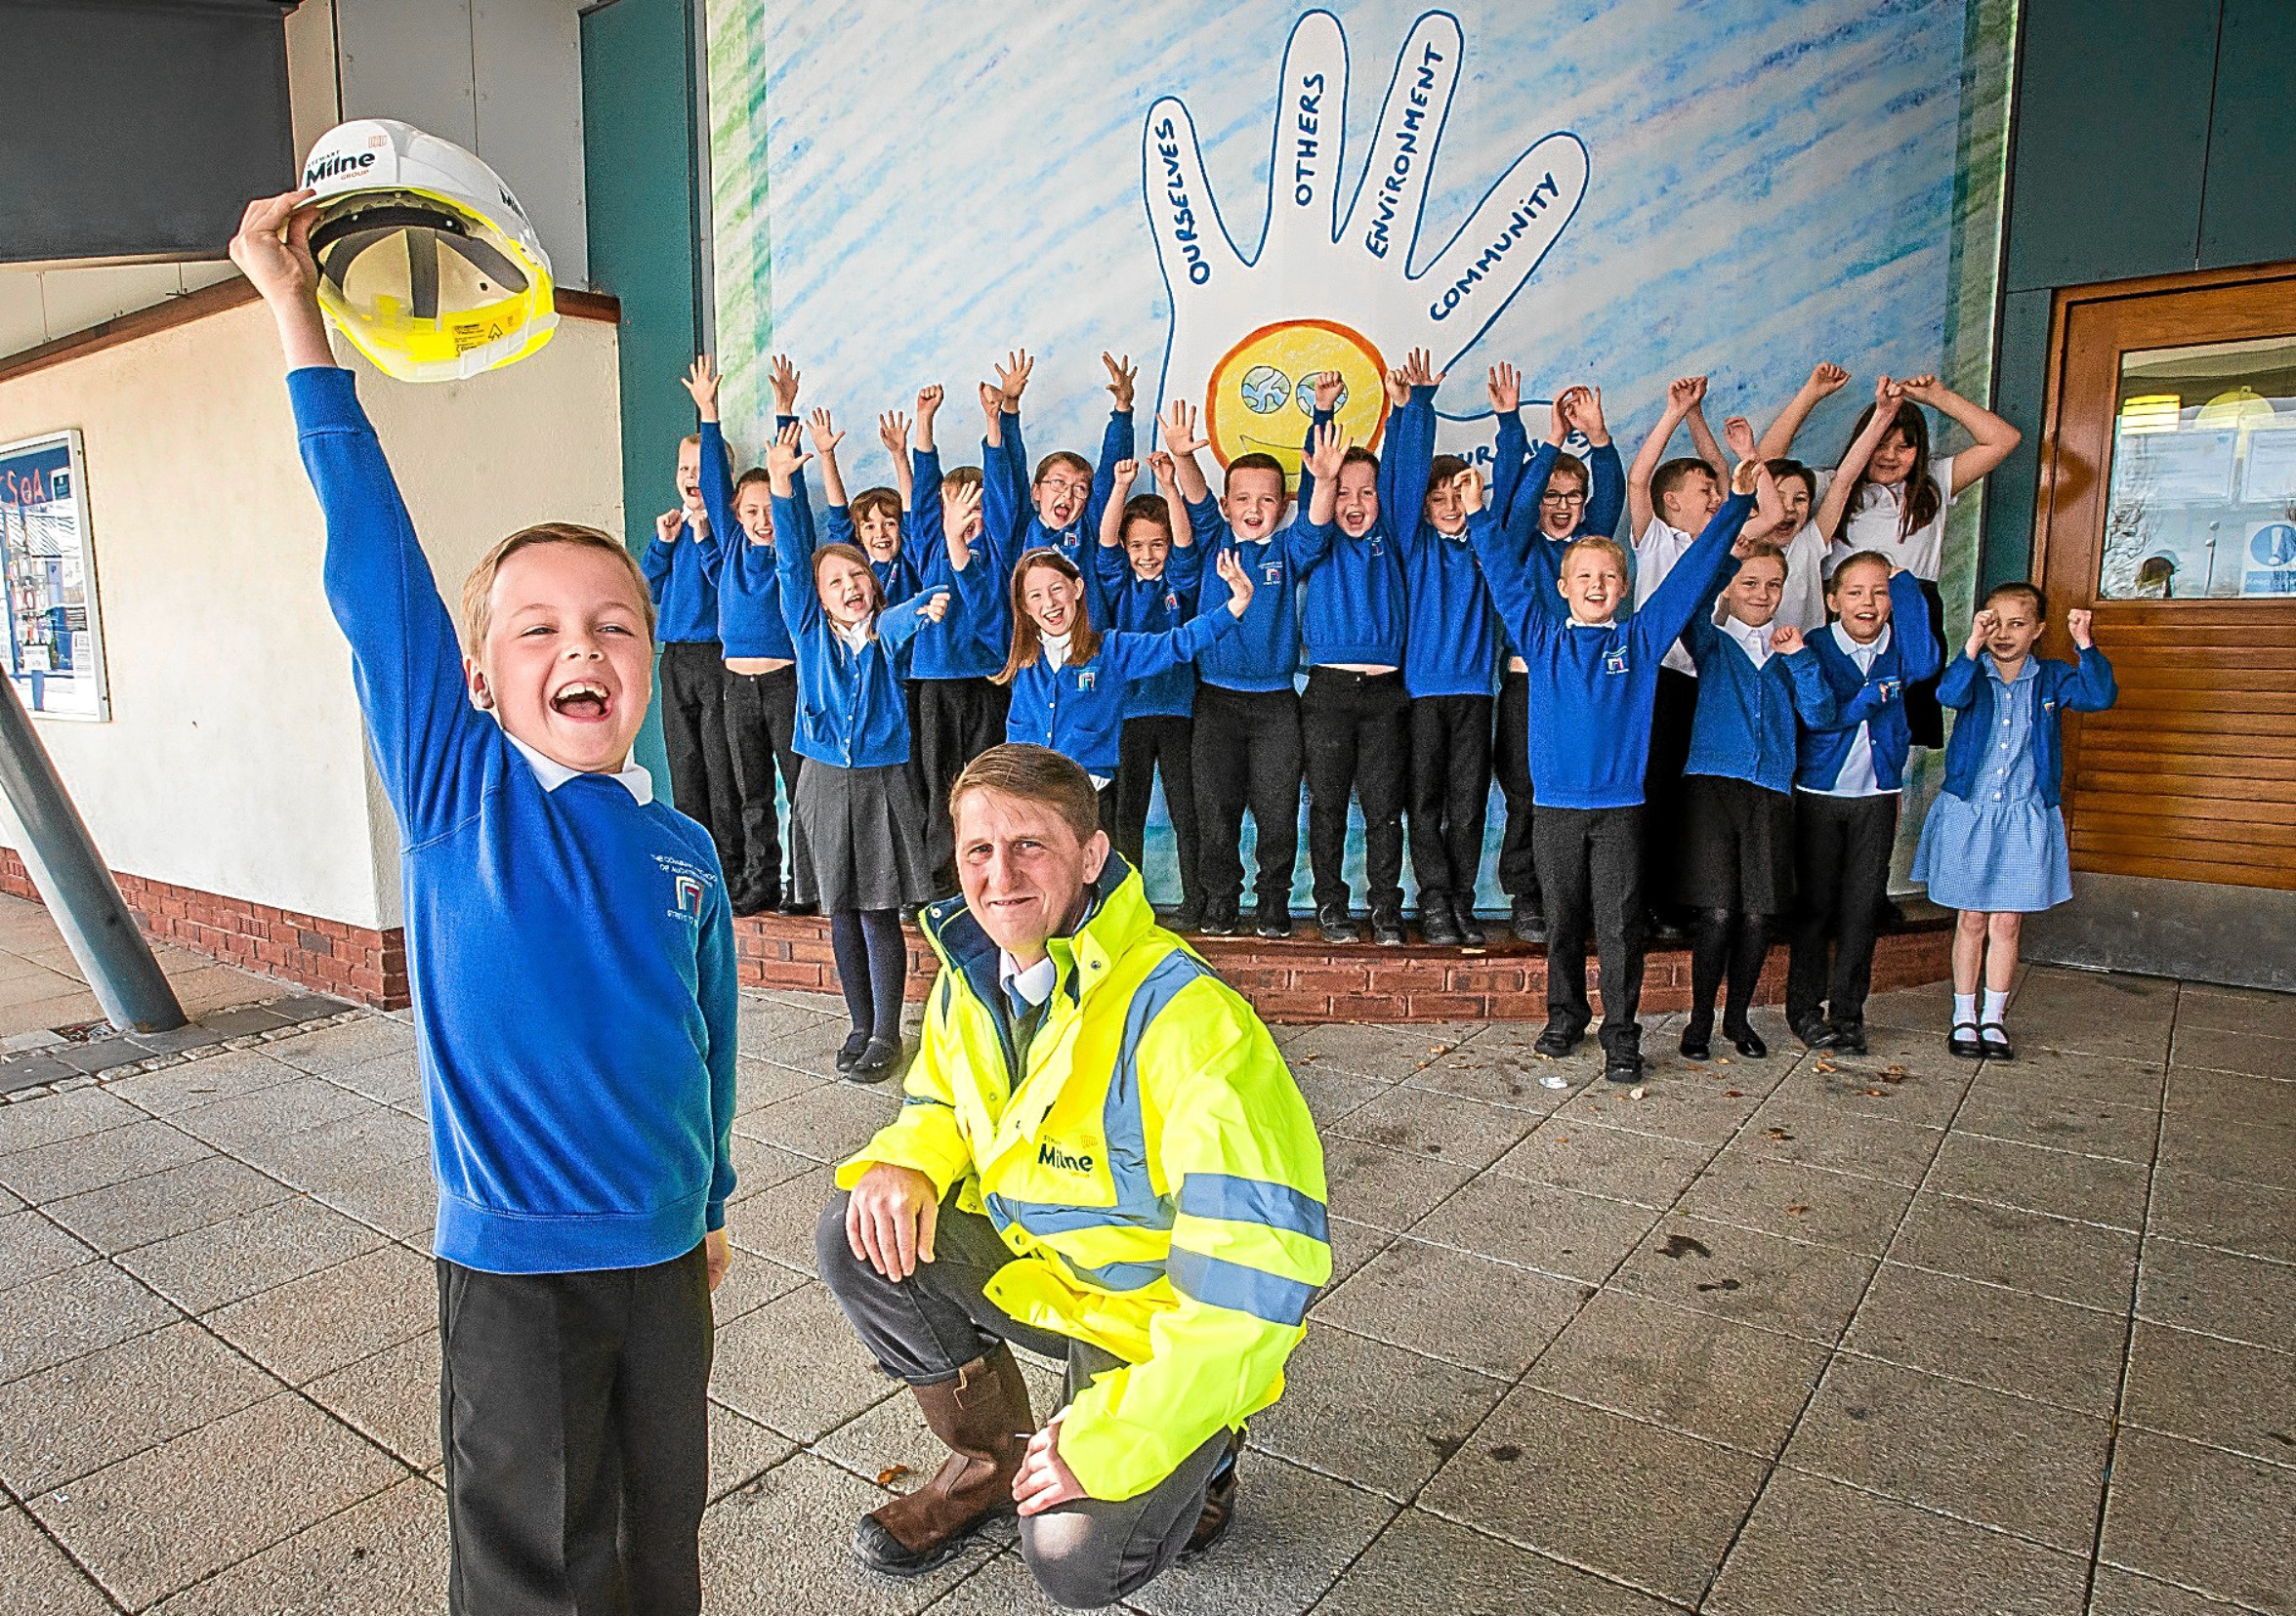 Primary four pupil Lucas Plowman with his classmates celebrating in front of his winning poster.